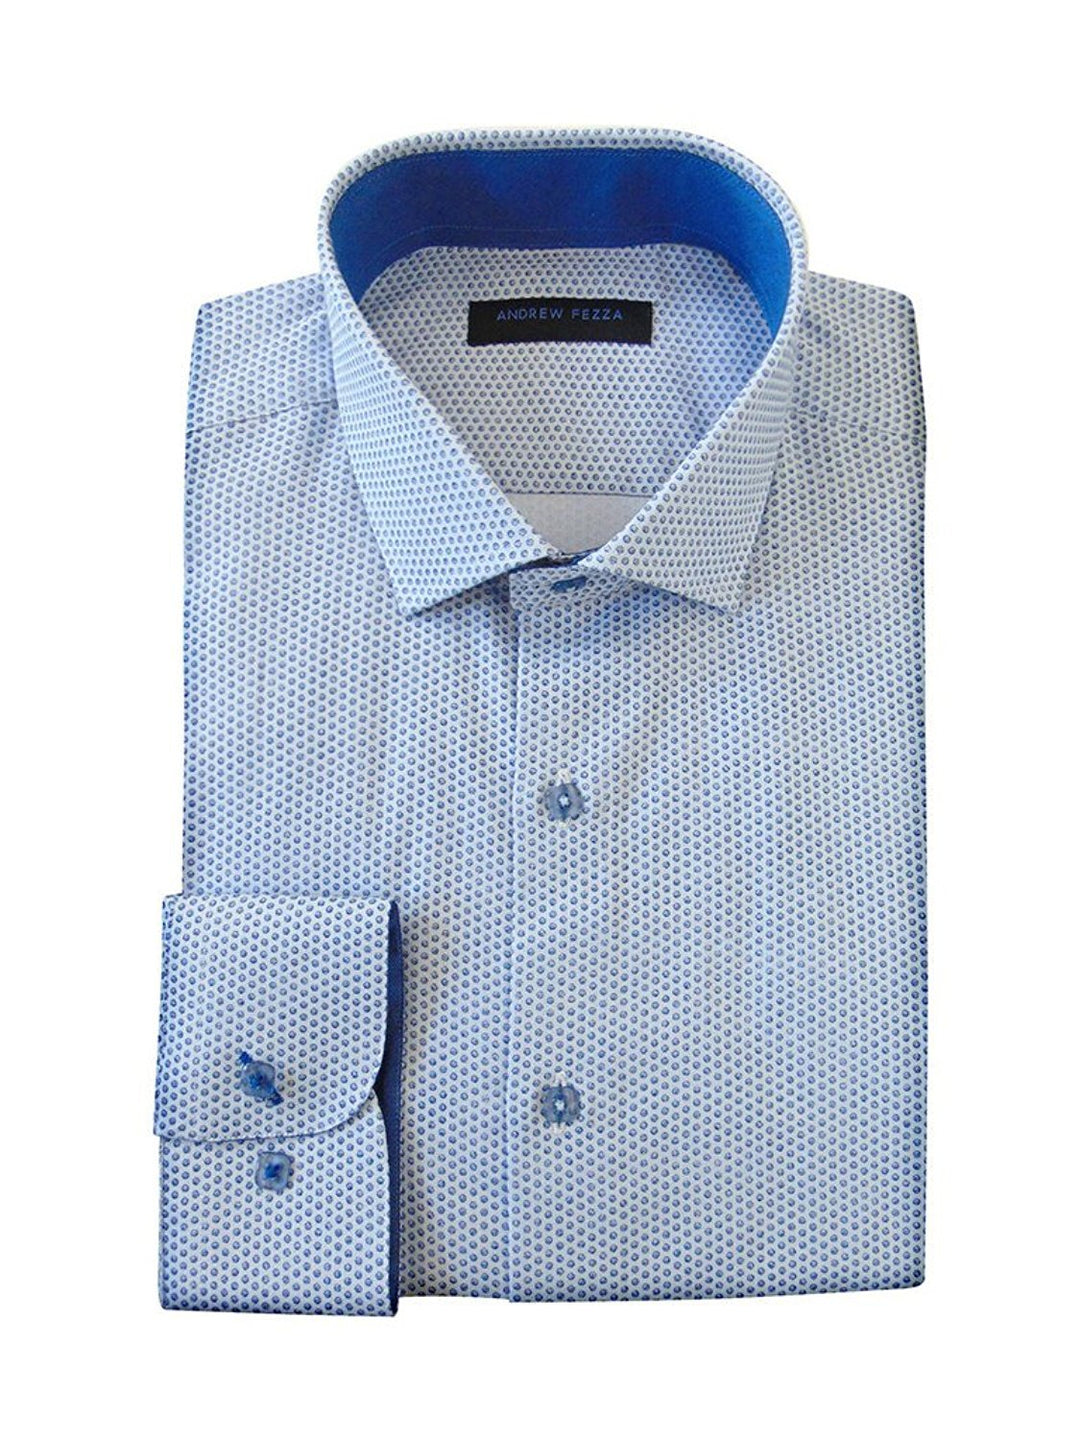 Andrew Fezza Men's Slim Fit Dress Shirt -Available in Many Paterns and Colors